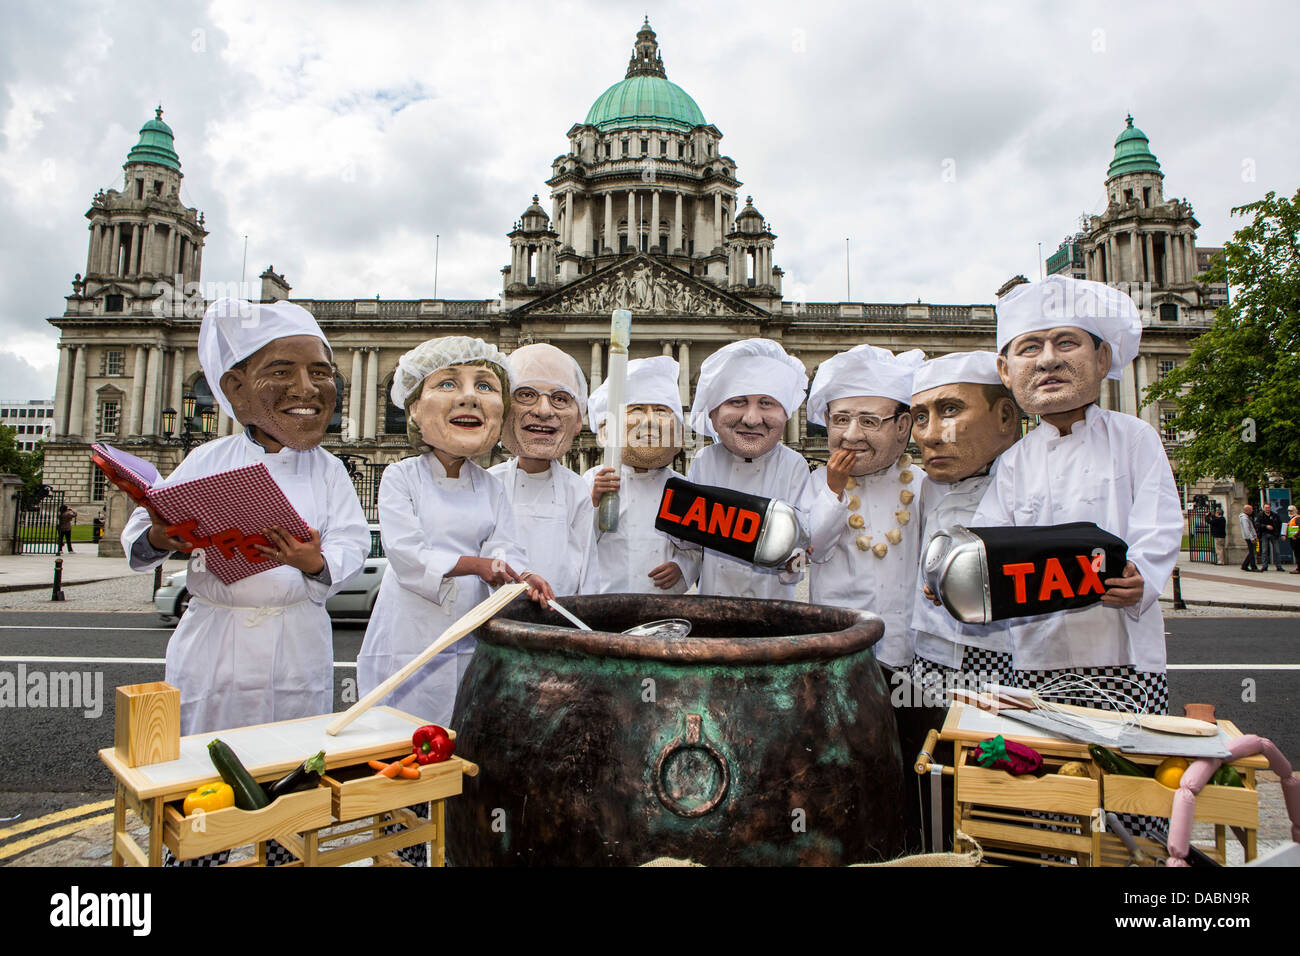 IF campaign. G8 leaders cooking up the right deal to fight hunger and poverty by tackling tax dodging. Stock Photo